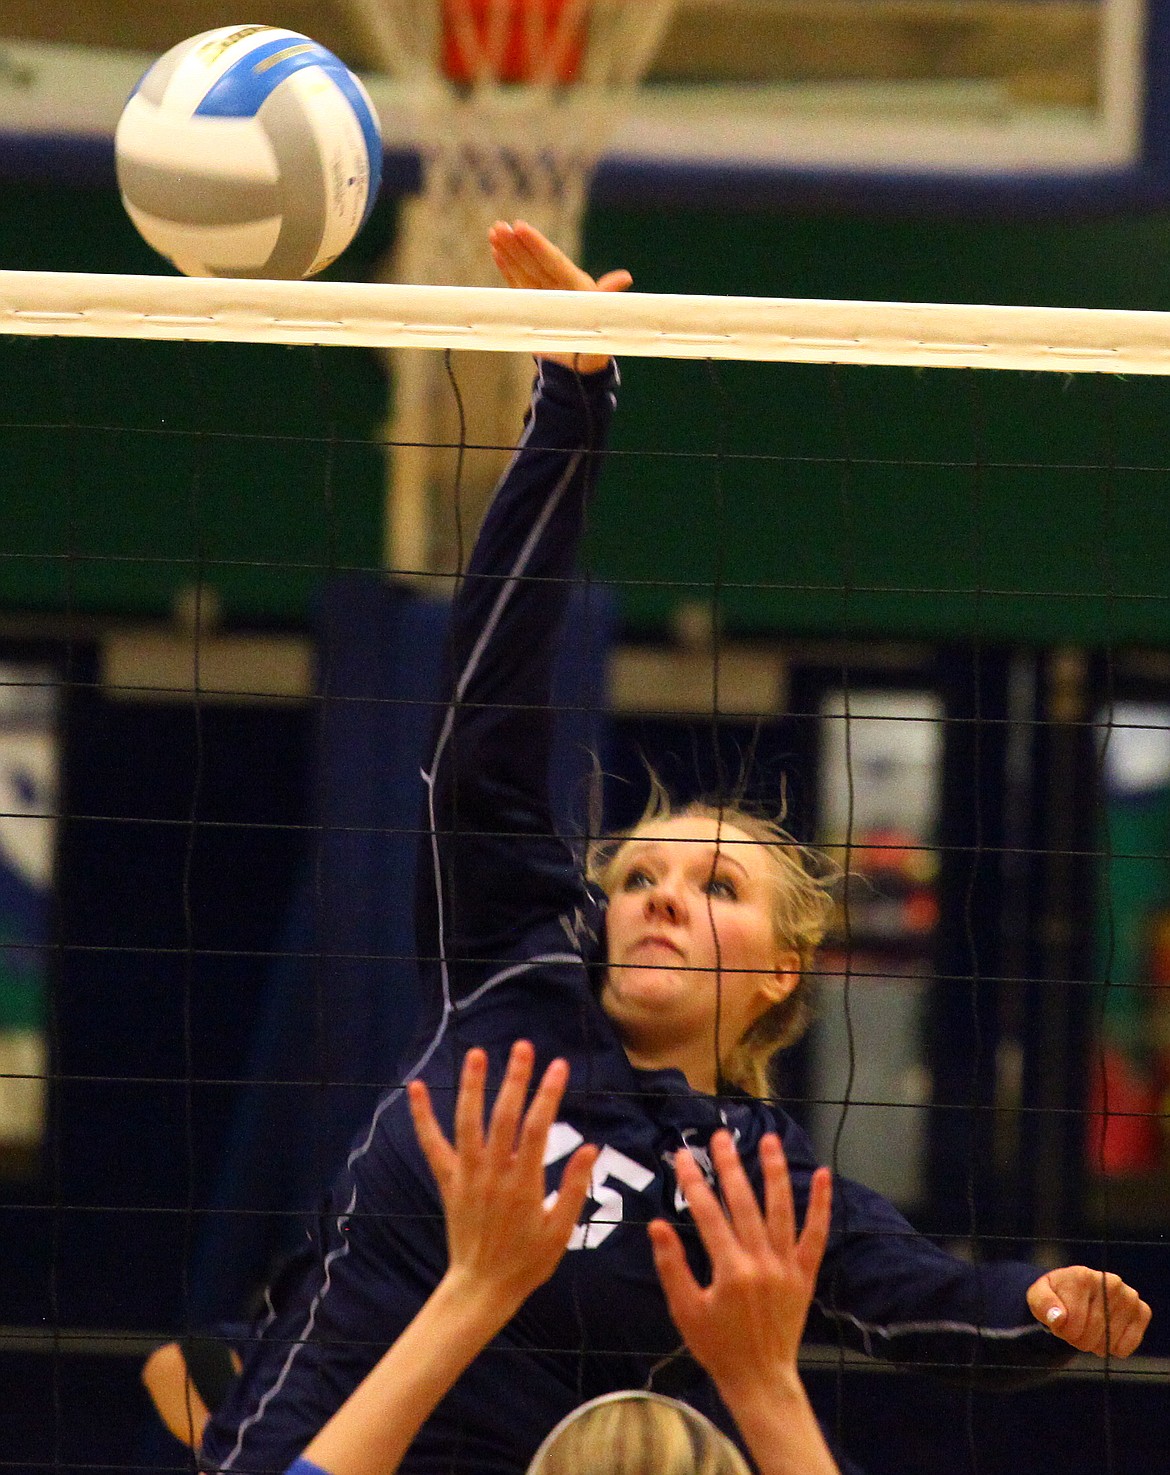 Rodney Harwood/Columbia Basin Herald
Sophomore Madison Powers finished with a team-high 12 kills for Big Bend Community College Wednesday night at DeVries Activity Center. The Vikings dropped the NWAC match in five games.